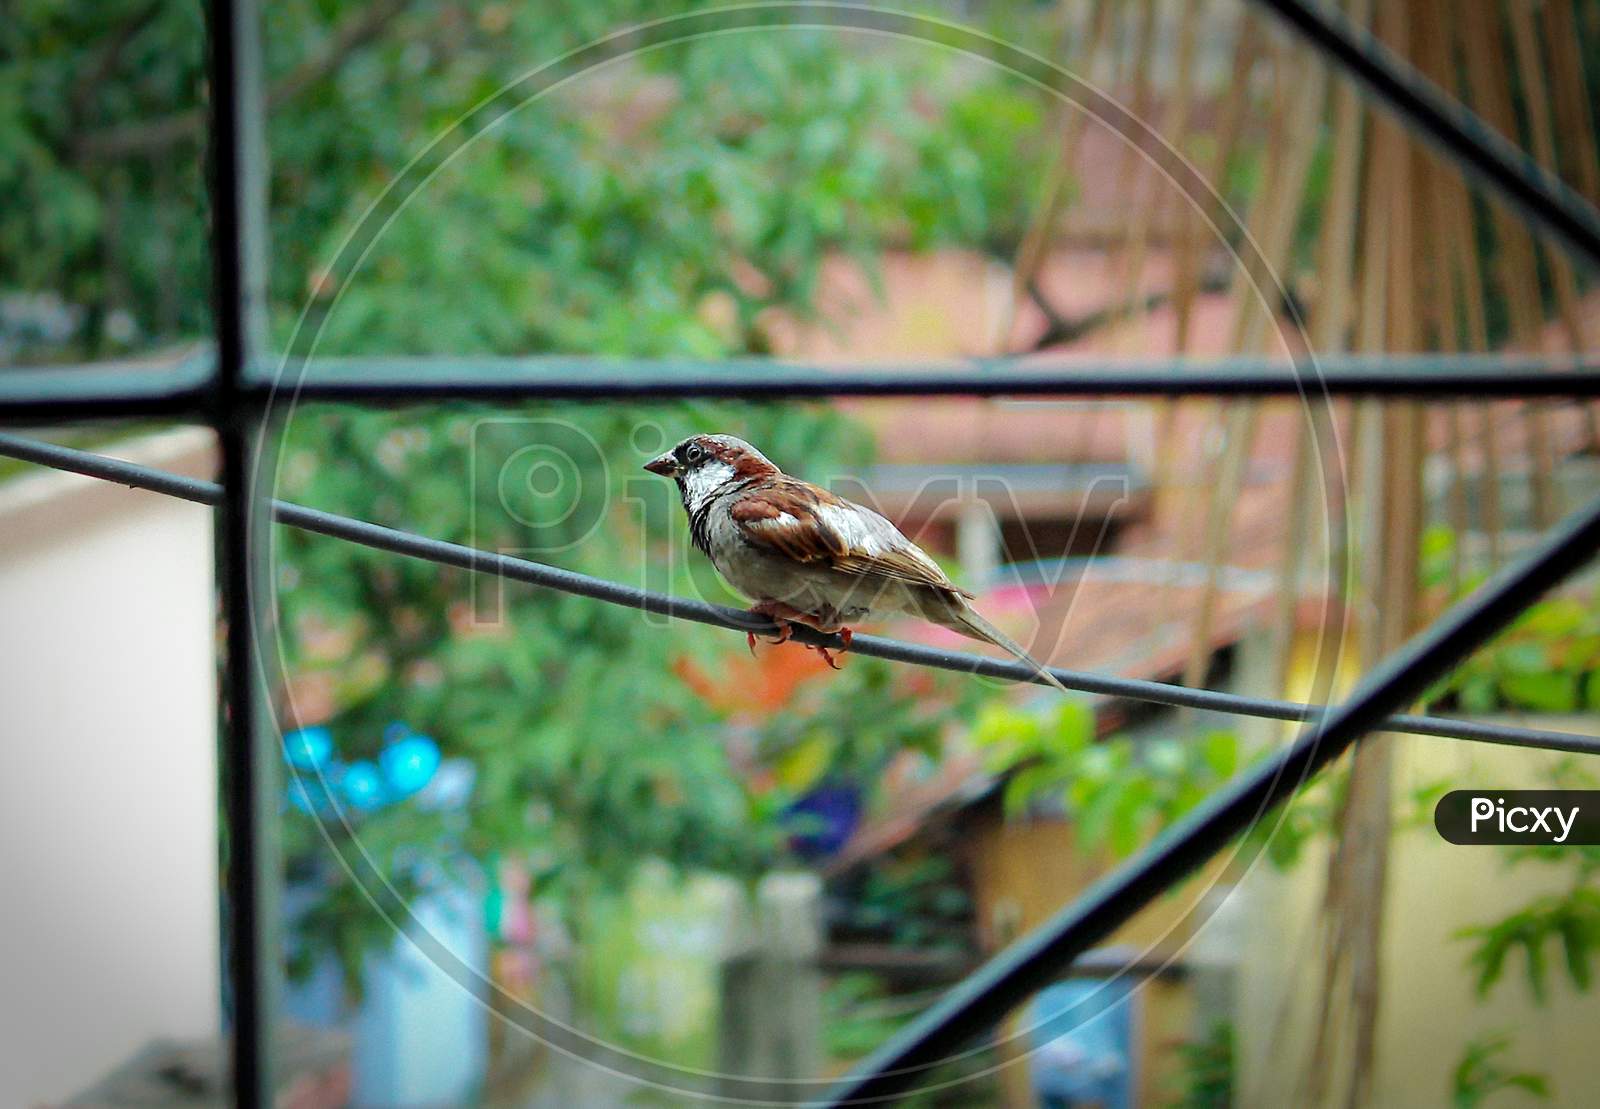 'Bird Photography' Sparrow Bird in India Hanging on a wire.